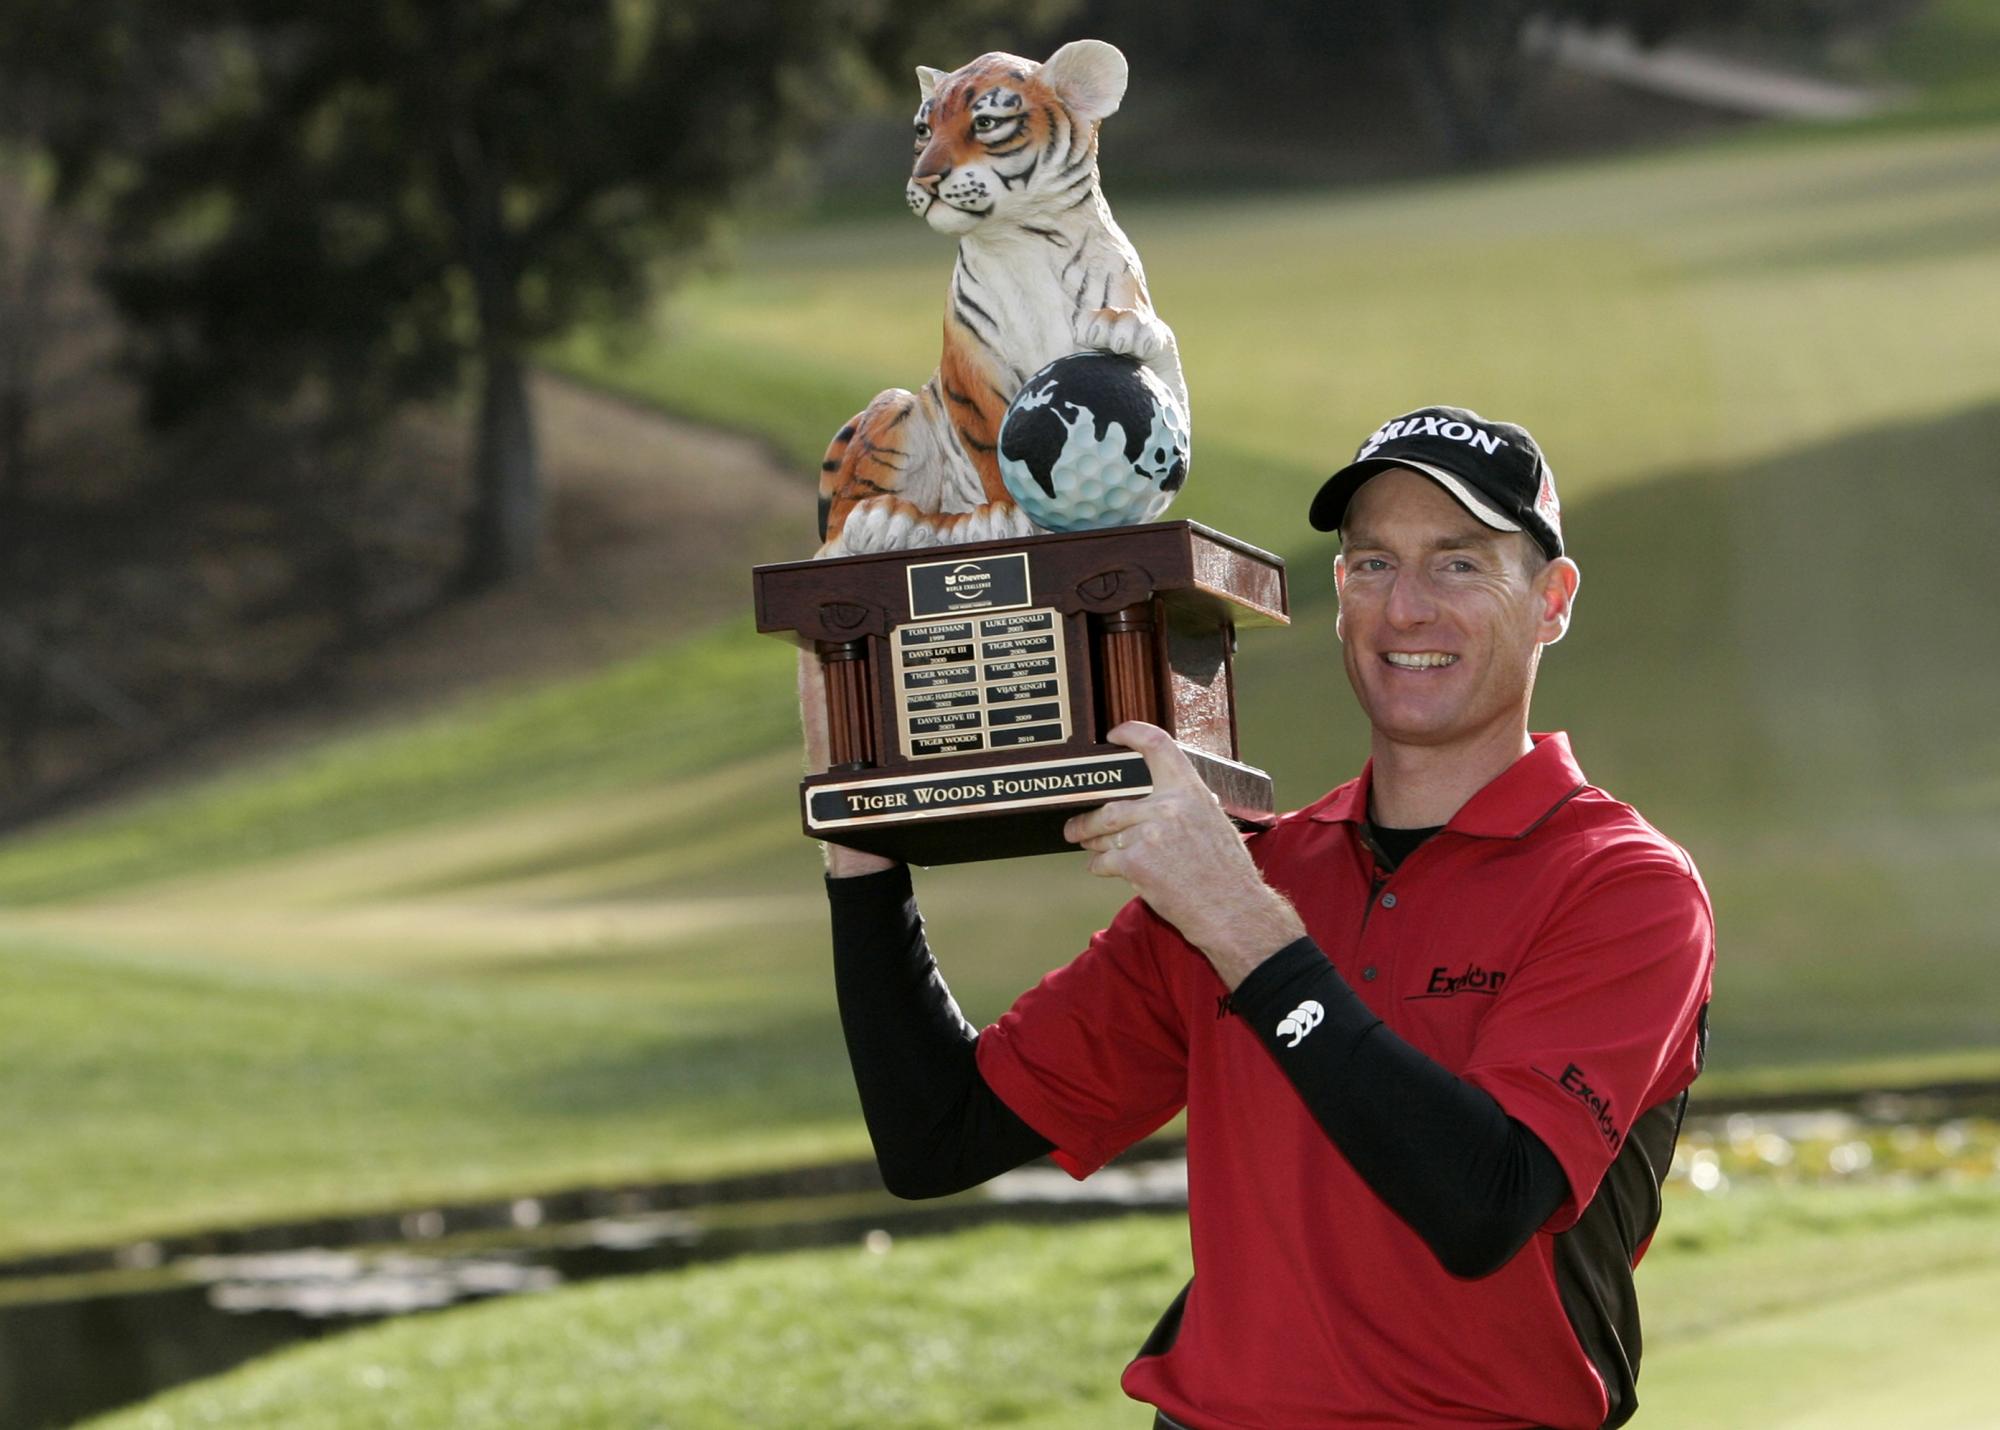 Furyk breaks title drought with win at Sherwood